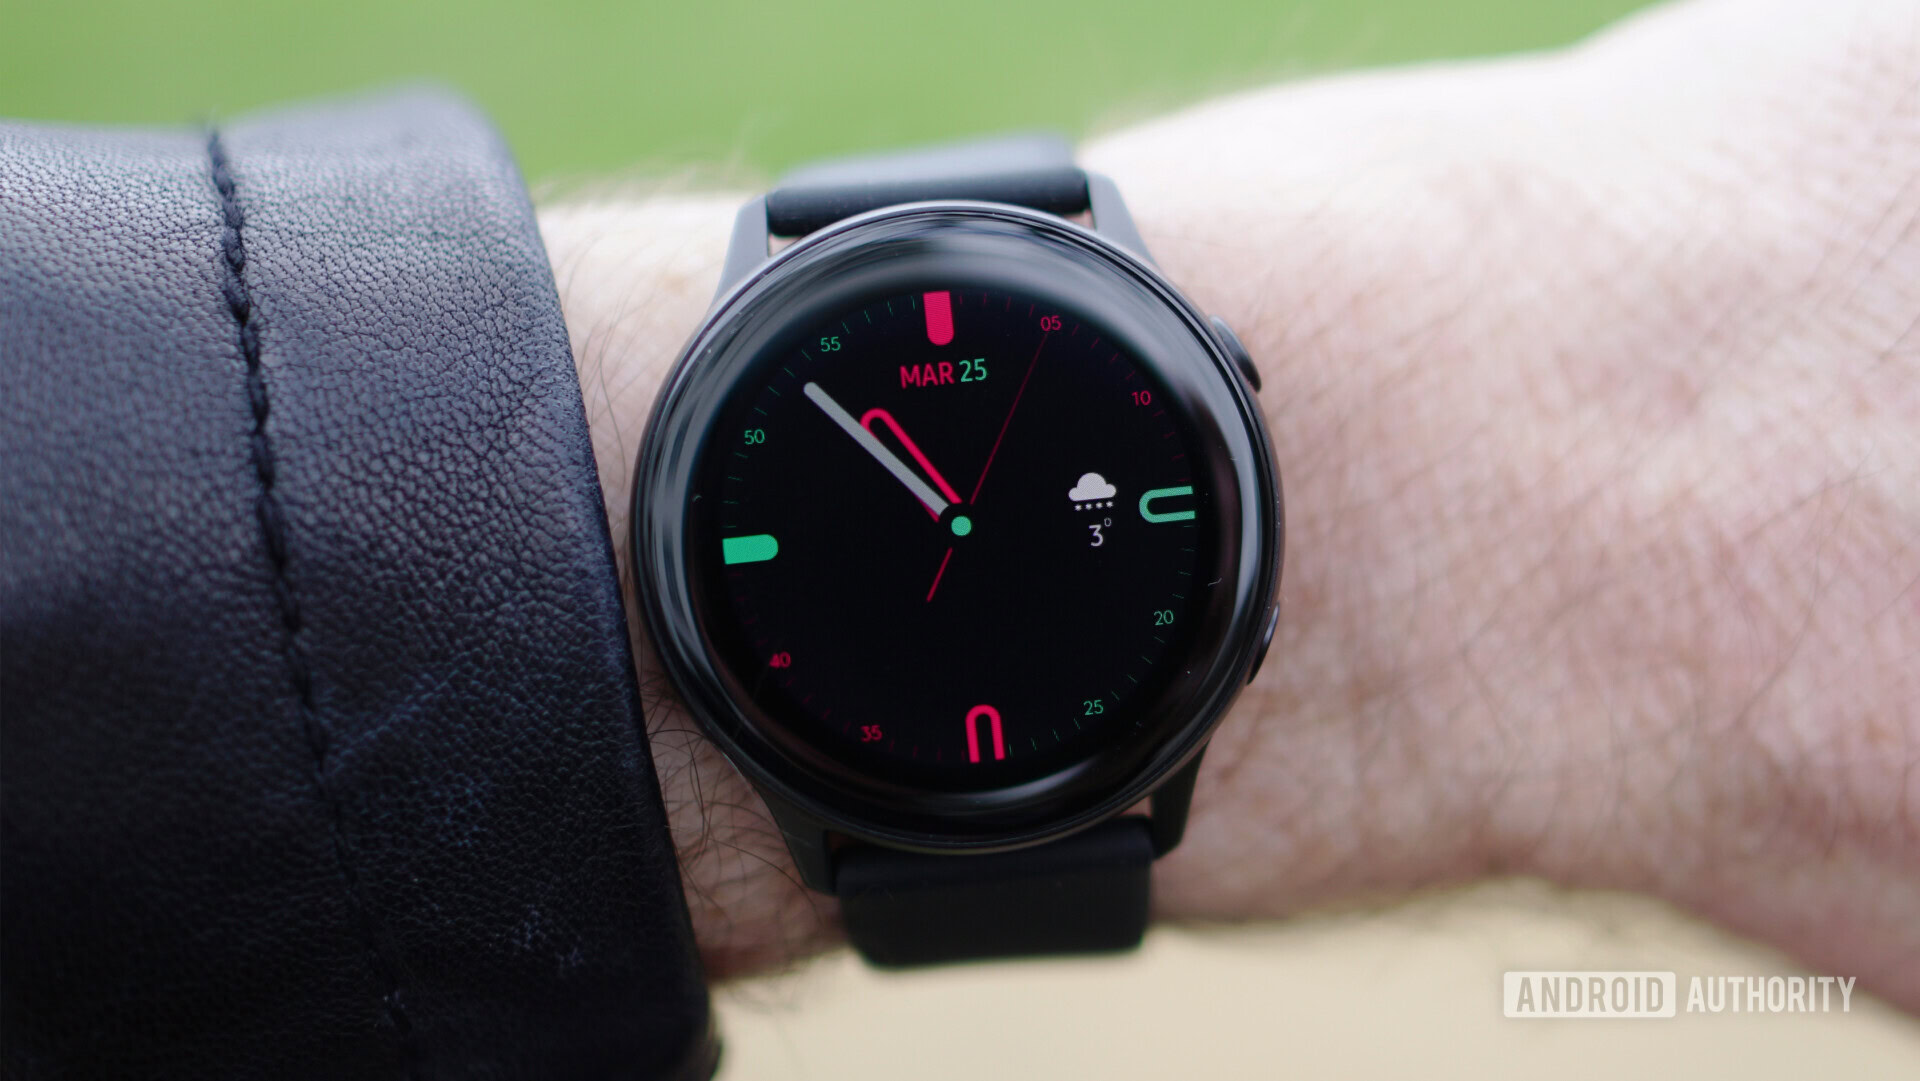 Samsung Galaxy Watch review: great hardware let down erratic